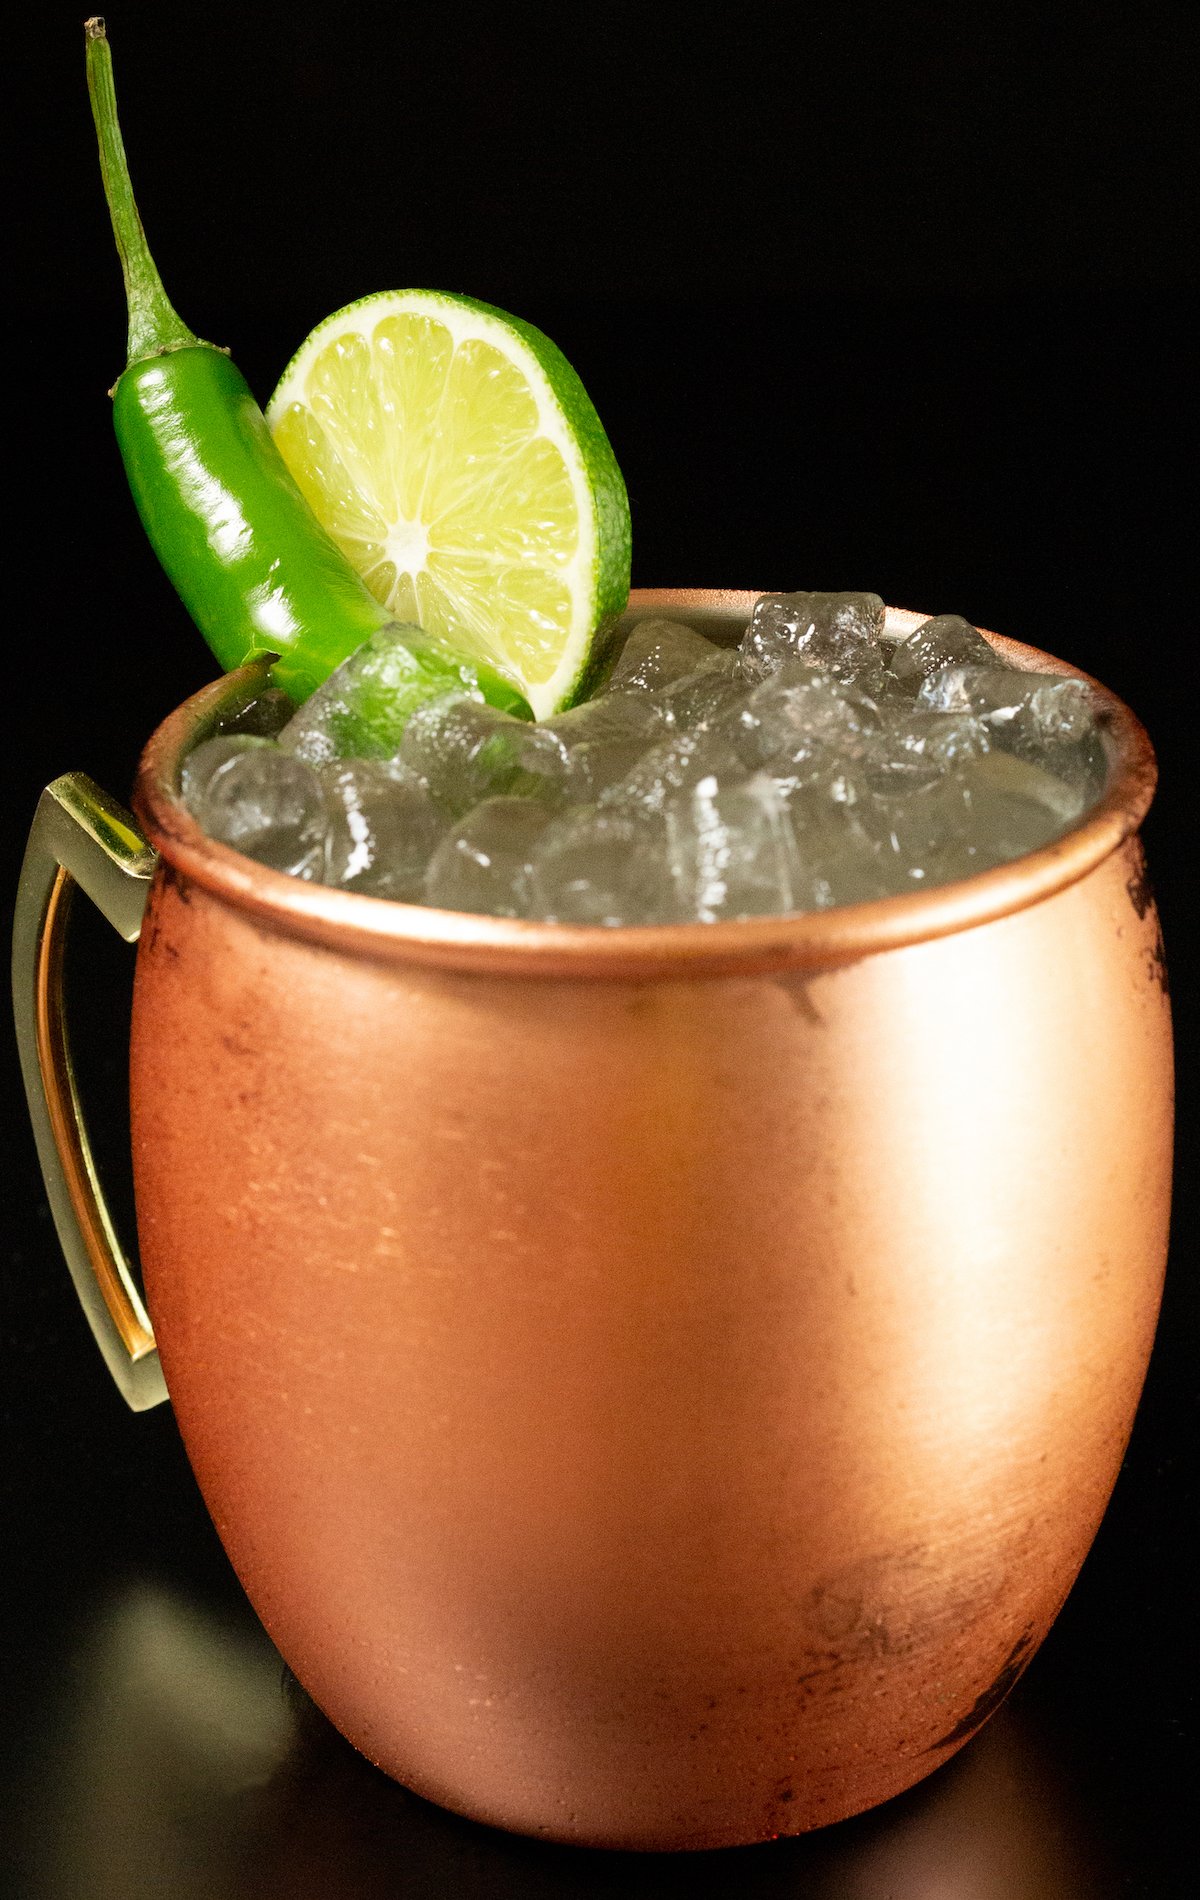 A copper moscow mule mug filled with a tequila Mexican mule sits on a black background.